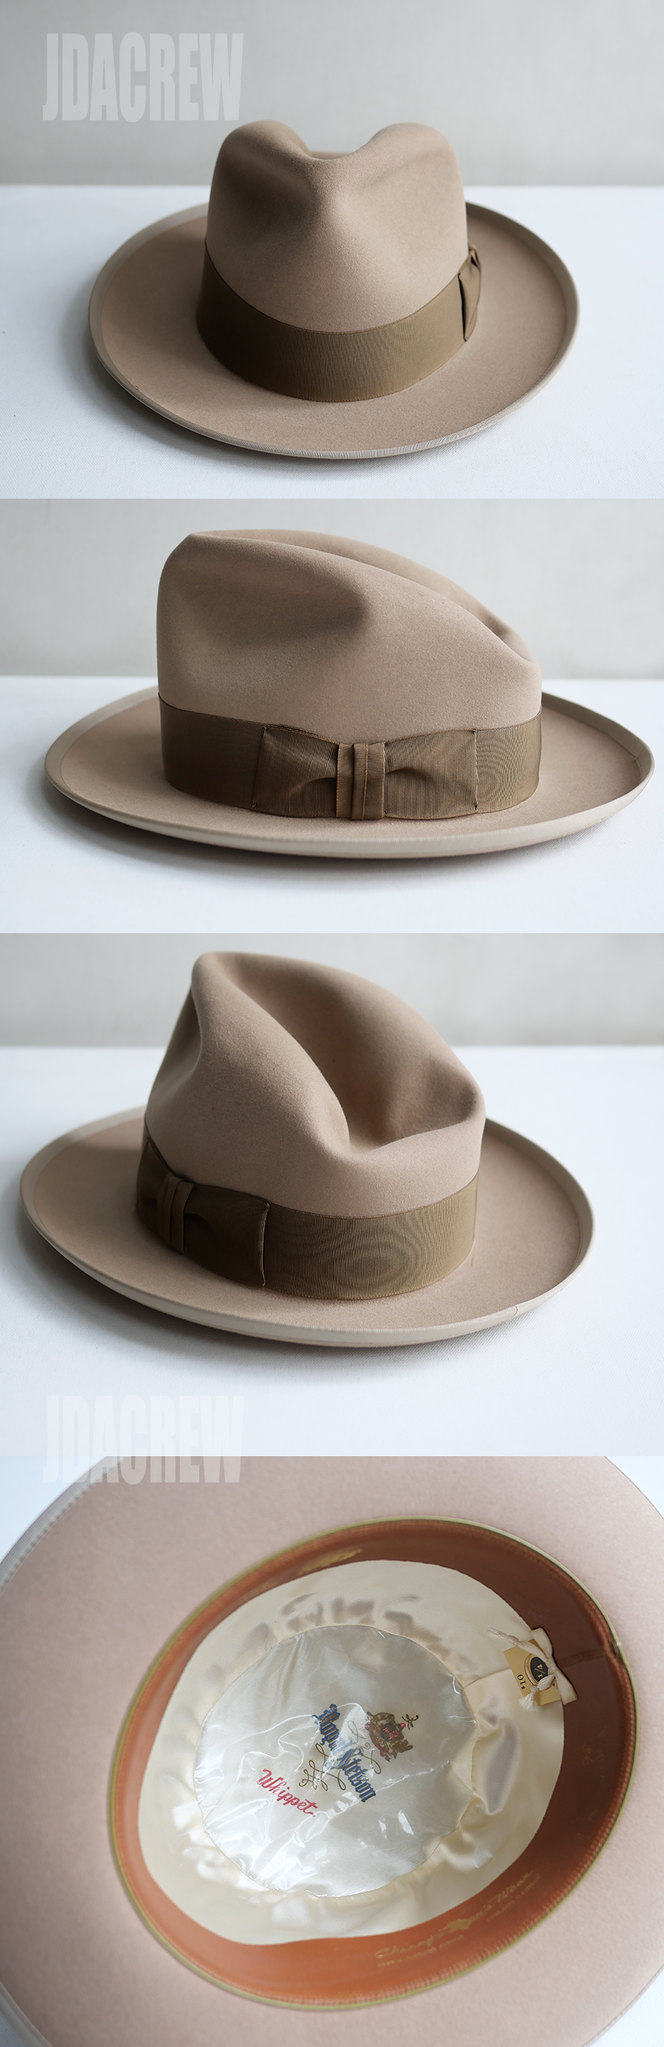 ROYAL STETSON WHIPPET ヴィンテージハット